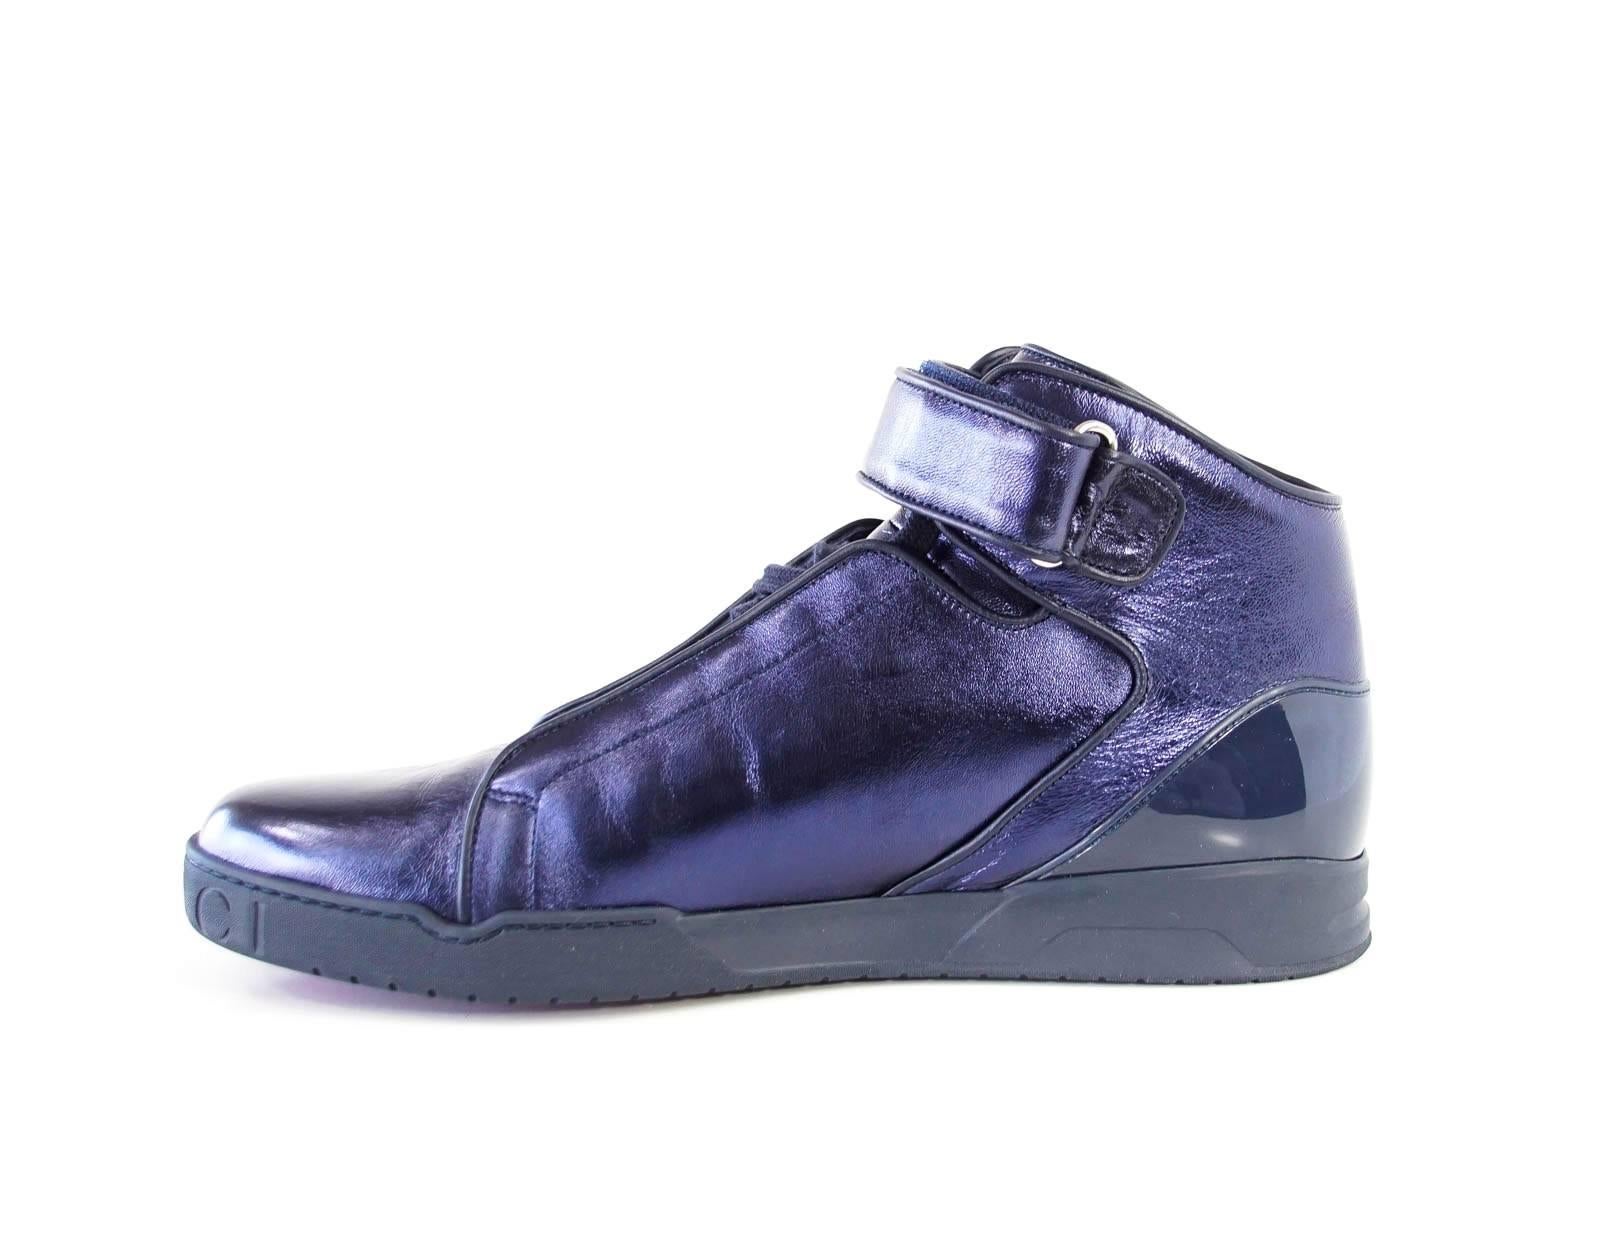 Guaranteed authentic GUCCI men's Midnight Blue Nappa Silk leather high-top sneaker.
Rich jewel toned blue lace up with side guard panels.
Rear is accentuated with patent leather.
Velcro grip ankle straps.
GUCCI is stamped around front of shoe.
Comes